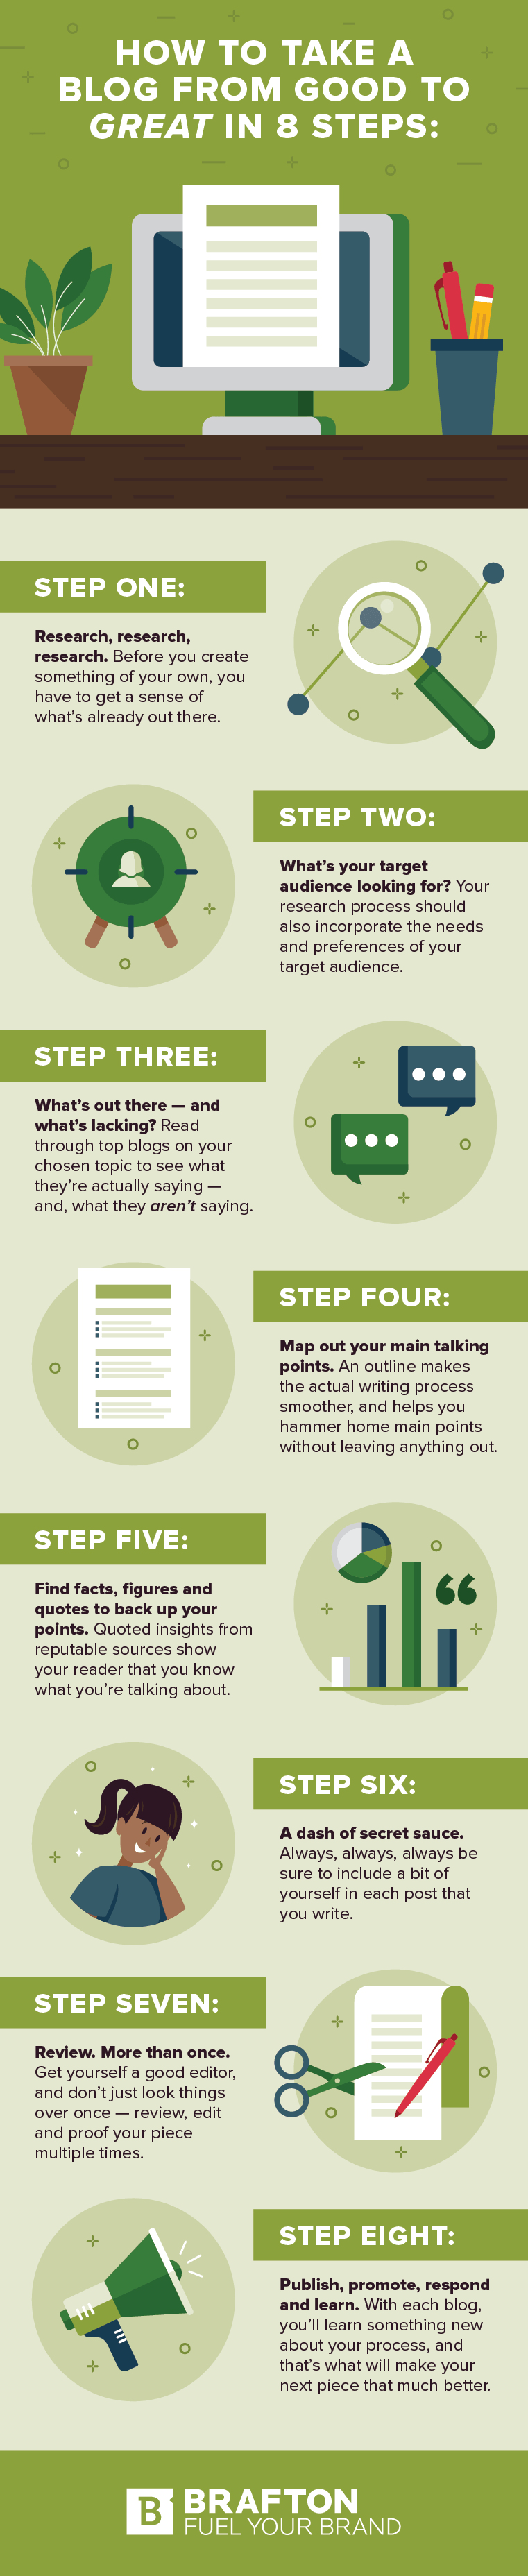 How to write a good blog post [infographic], The Secret Sauce to Writing a Perfect Blog Post - infographic